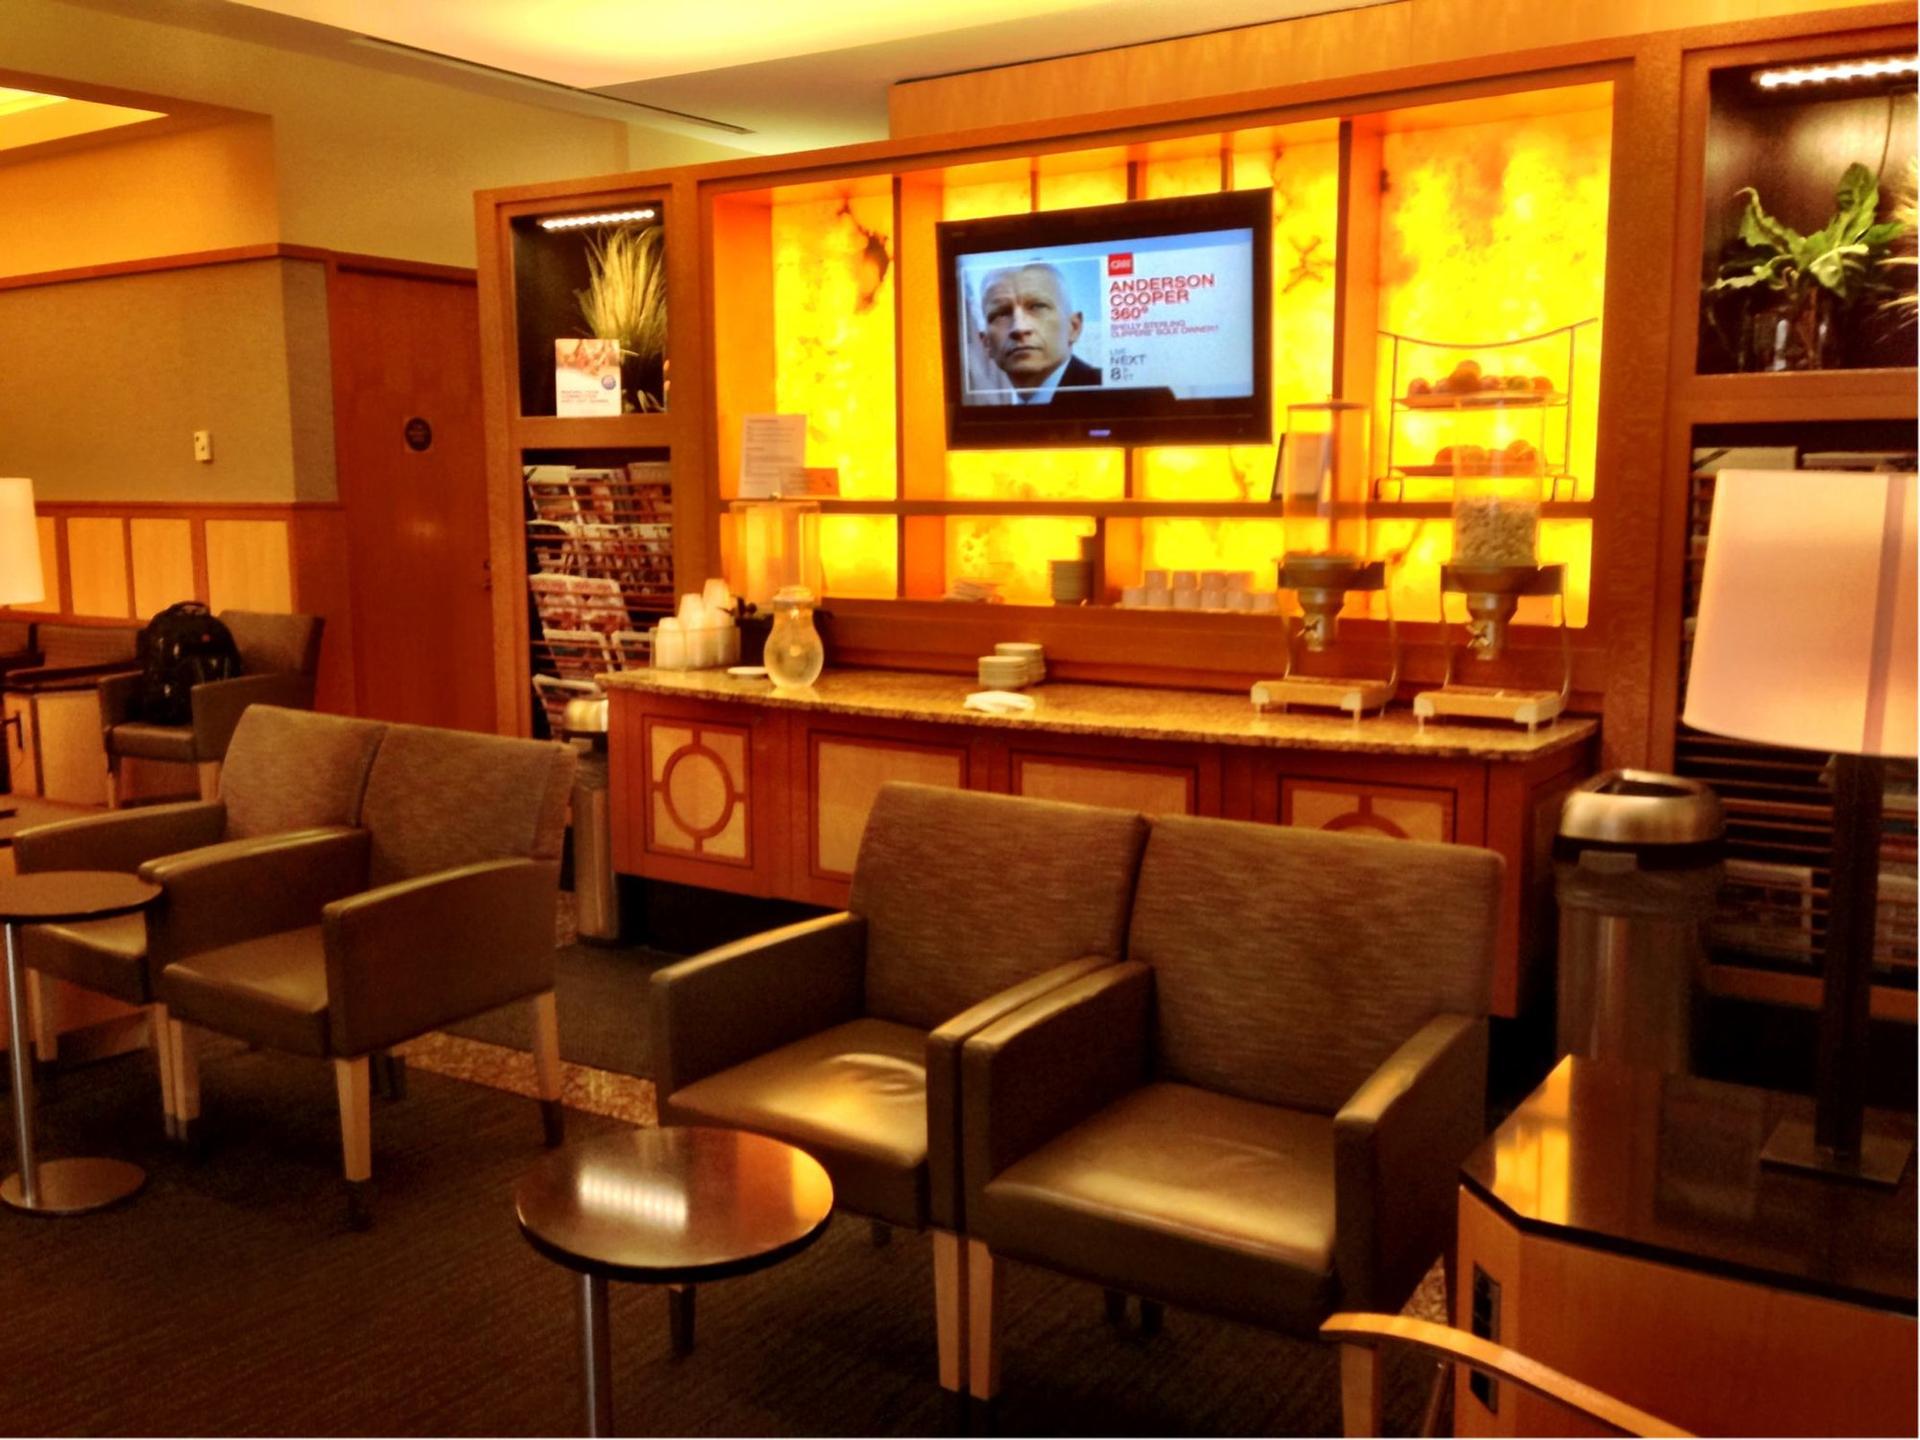 American Airlines Admirals Club image 2 of 7